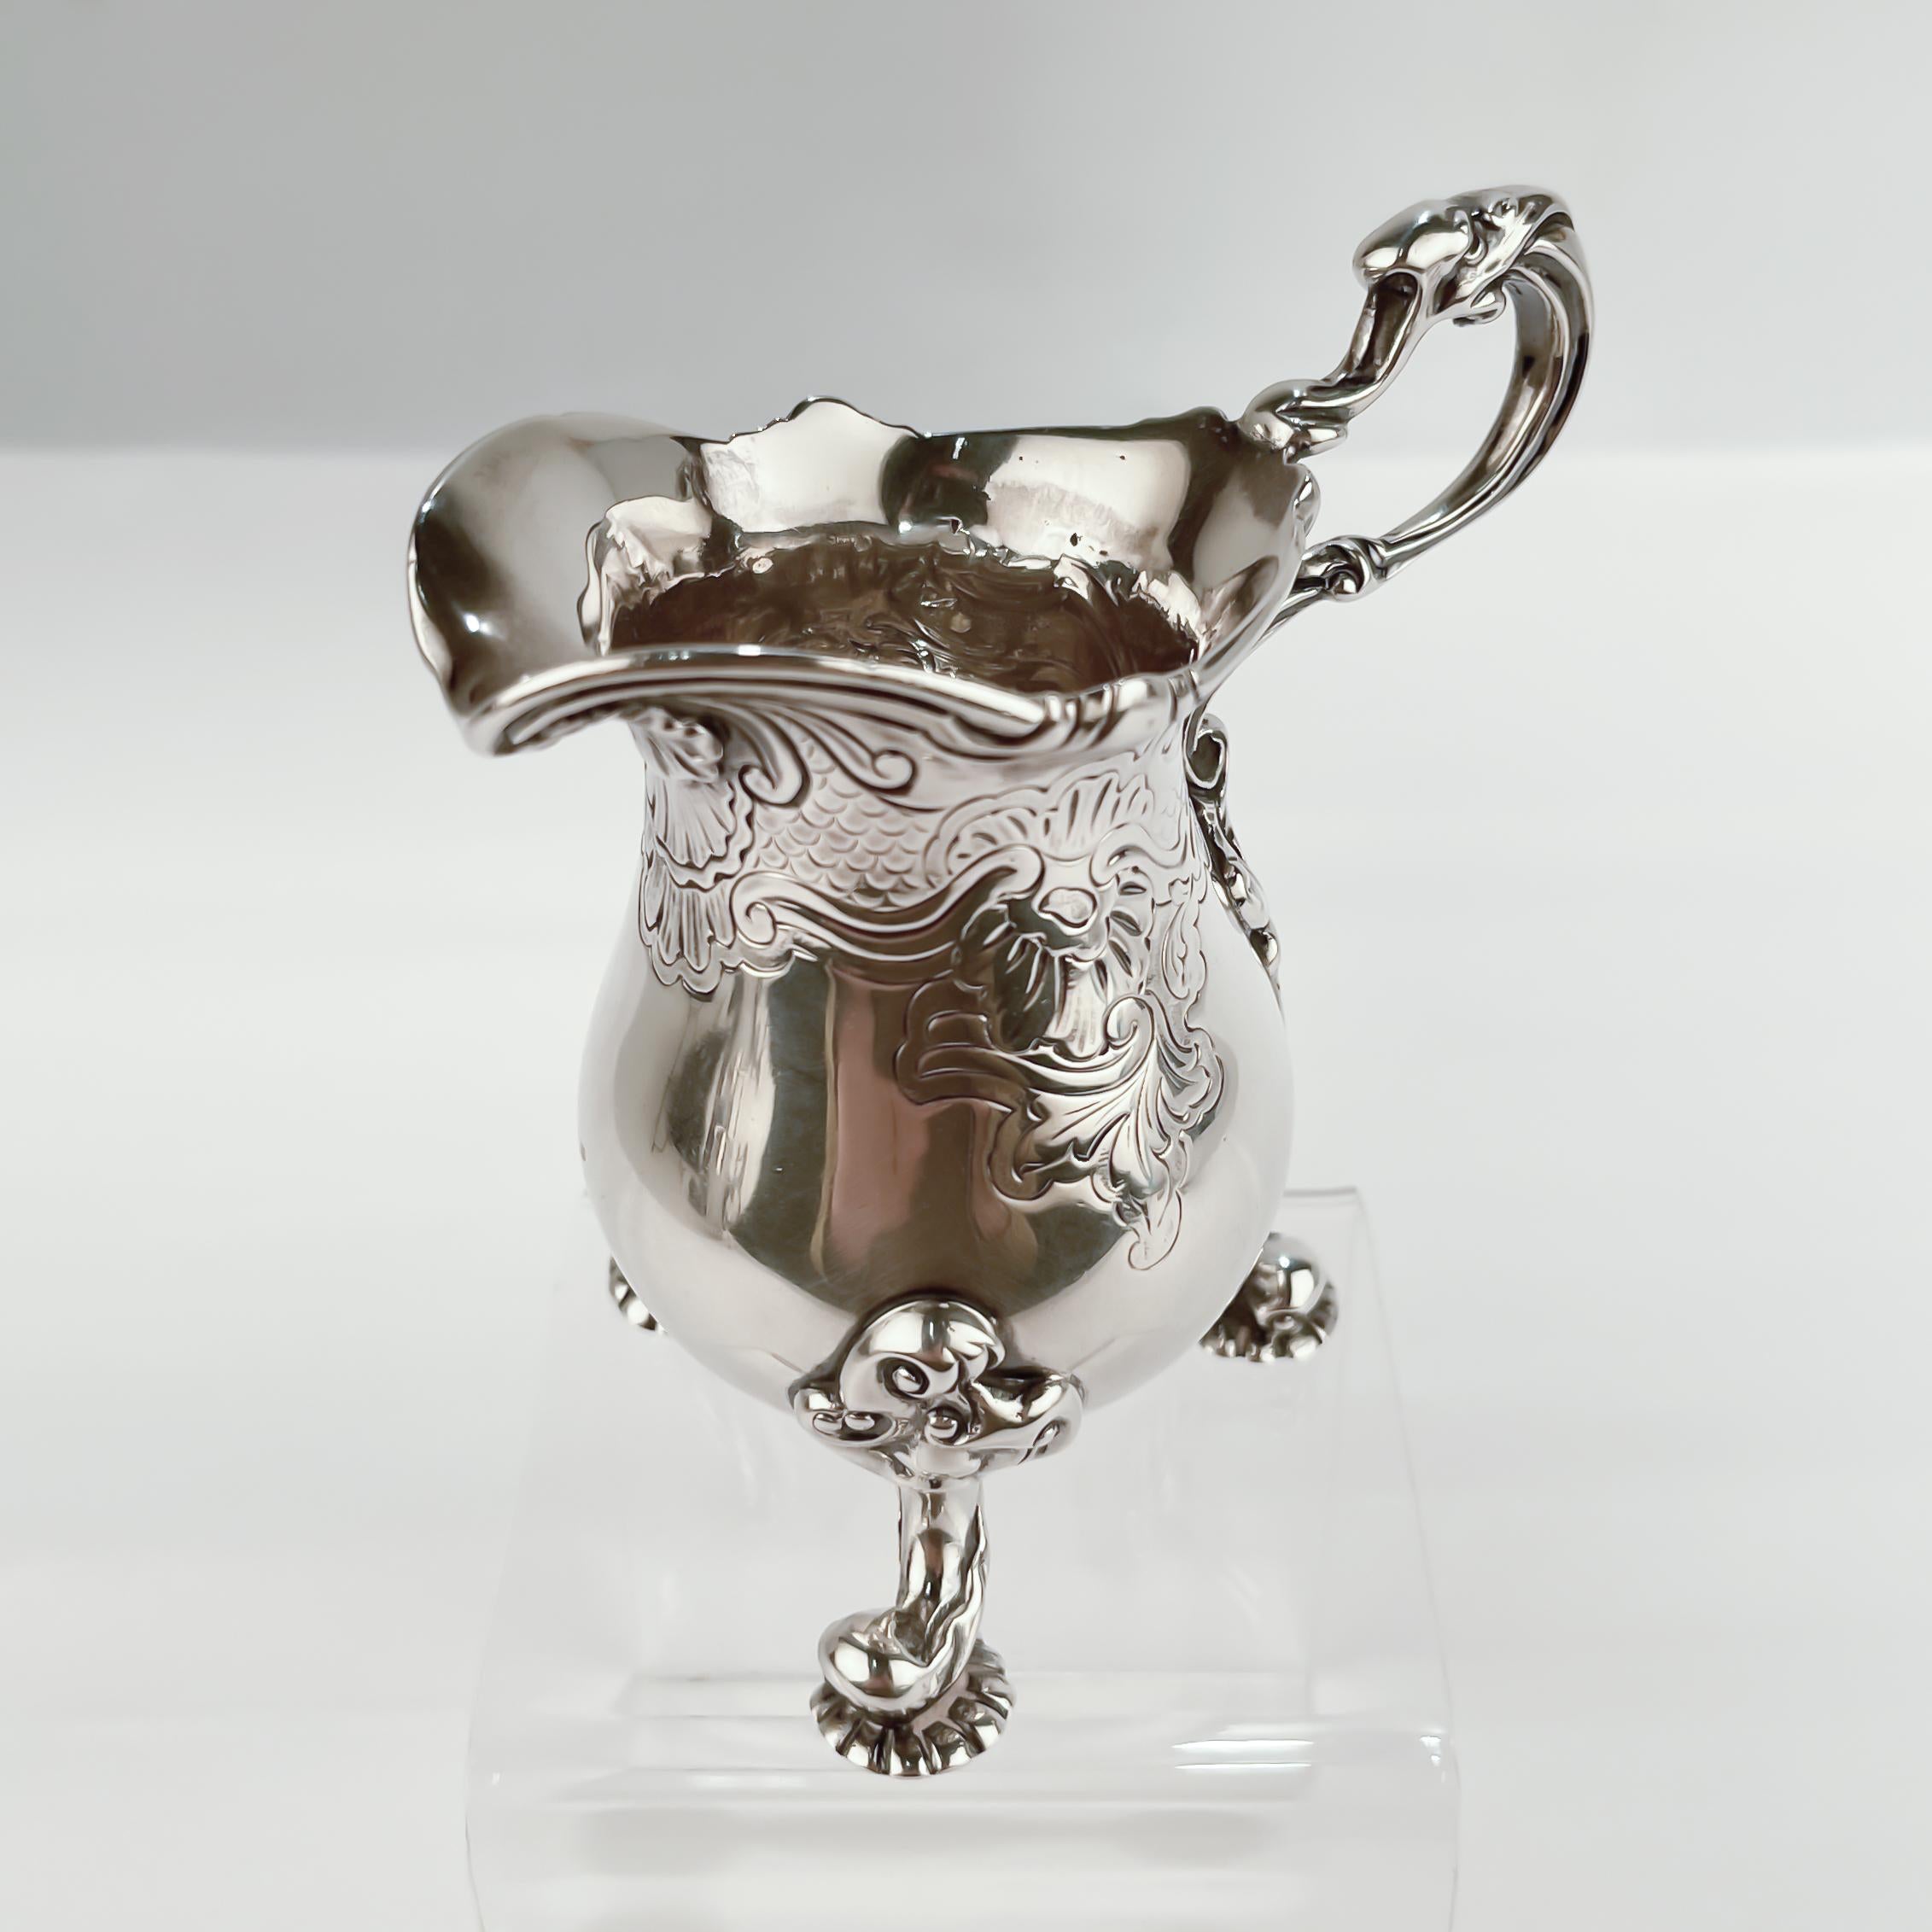 A very fine sterling silver creamer or milk pitcher.

By Carrington & Co. 

With an exuberant neo-Rococo (or George II style) design including etched scroll work and cells to the body, an applied shell device to the spout, a handle with a fantasy